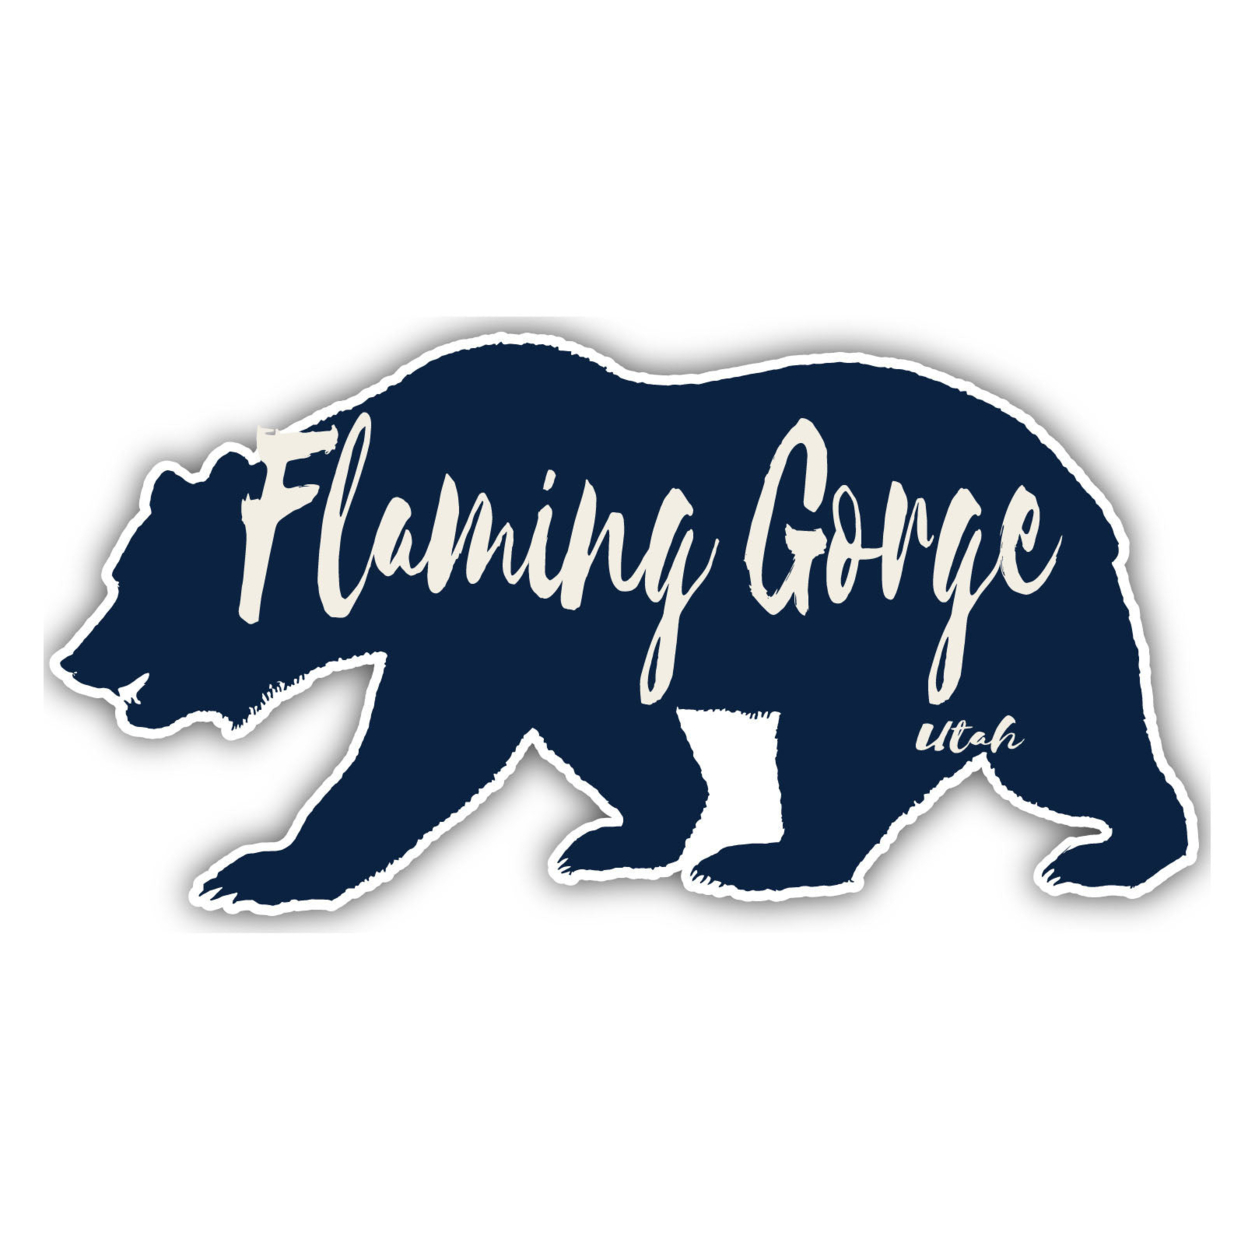 Flaming Gorge Utah Souvenir Decorative Stickers (Choose Theme And Size) - 4-Pack, 6-Inch, Bear